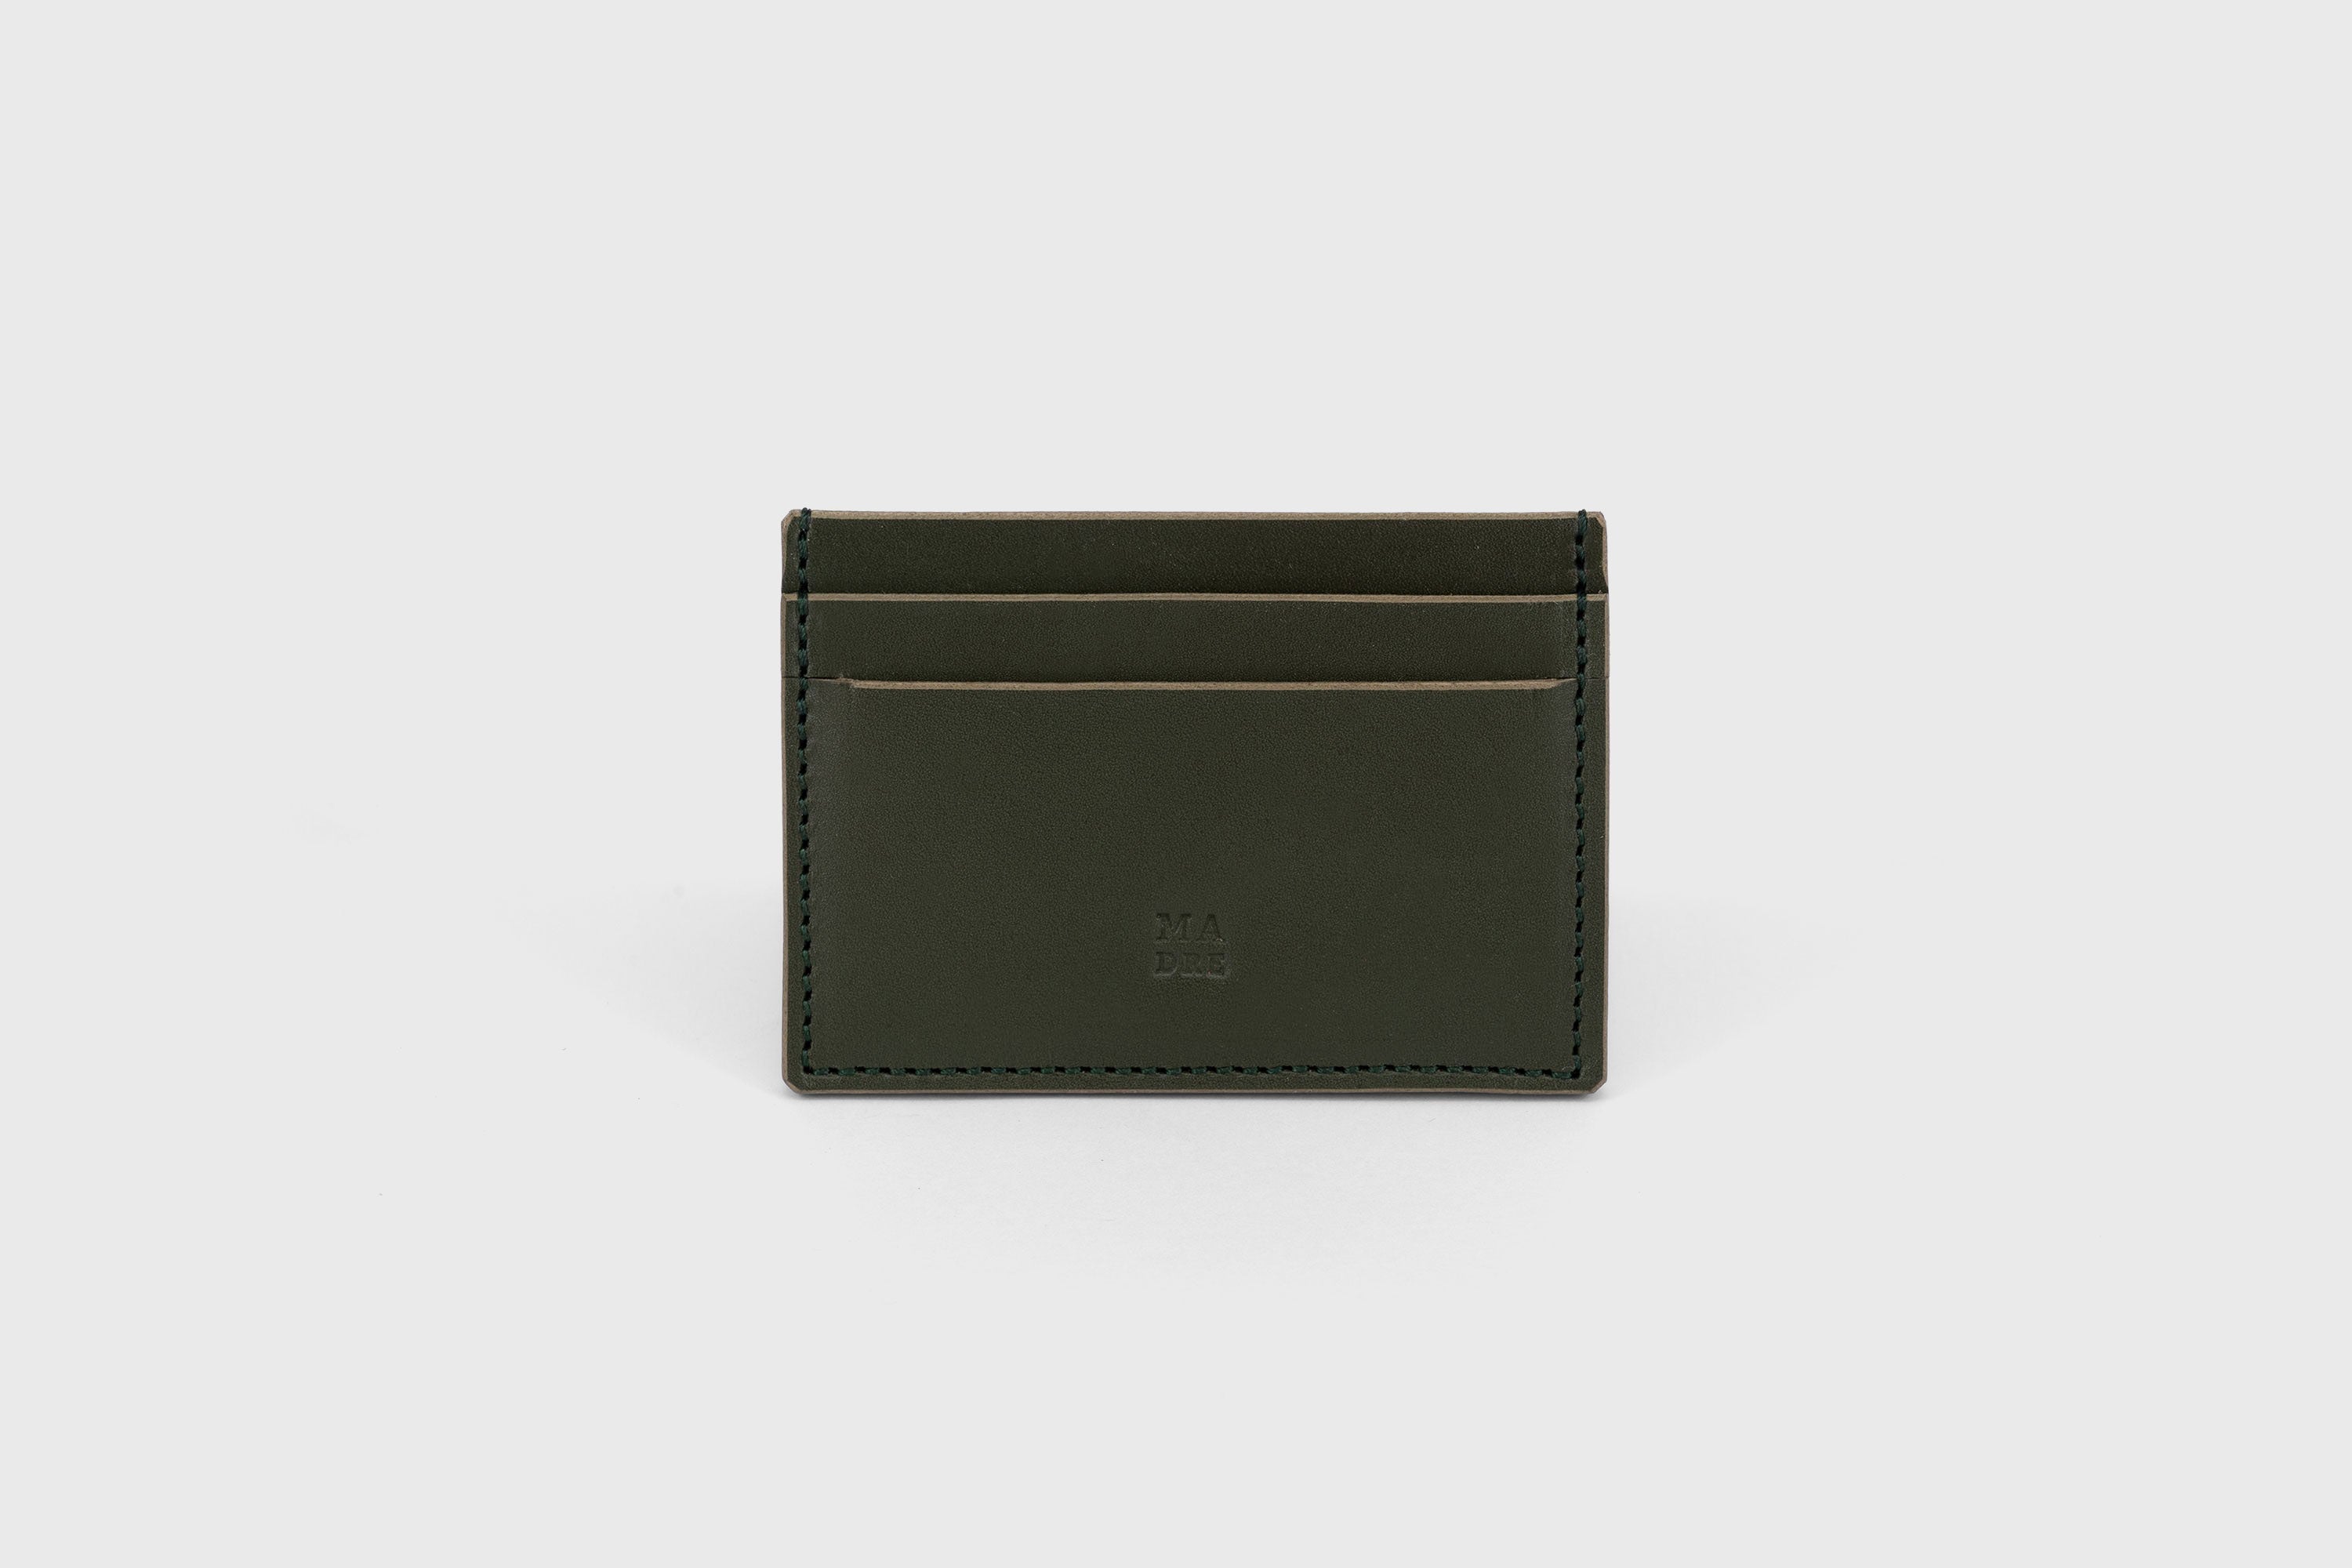 Credit Card Wallet Minimal in Olive Green Leather Vachetta Vegetable Tanned Leather Handmade and Design by Atelier Madre Manuel Dreesmann Barcelona Spain